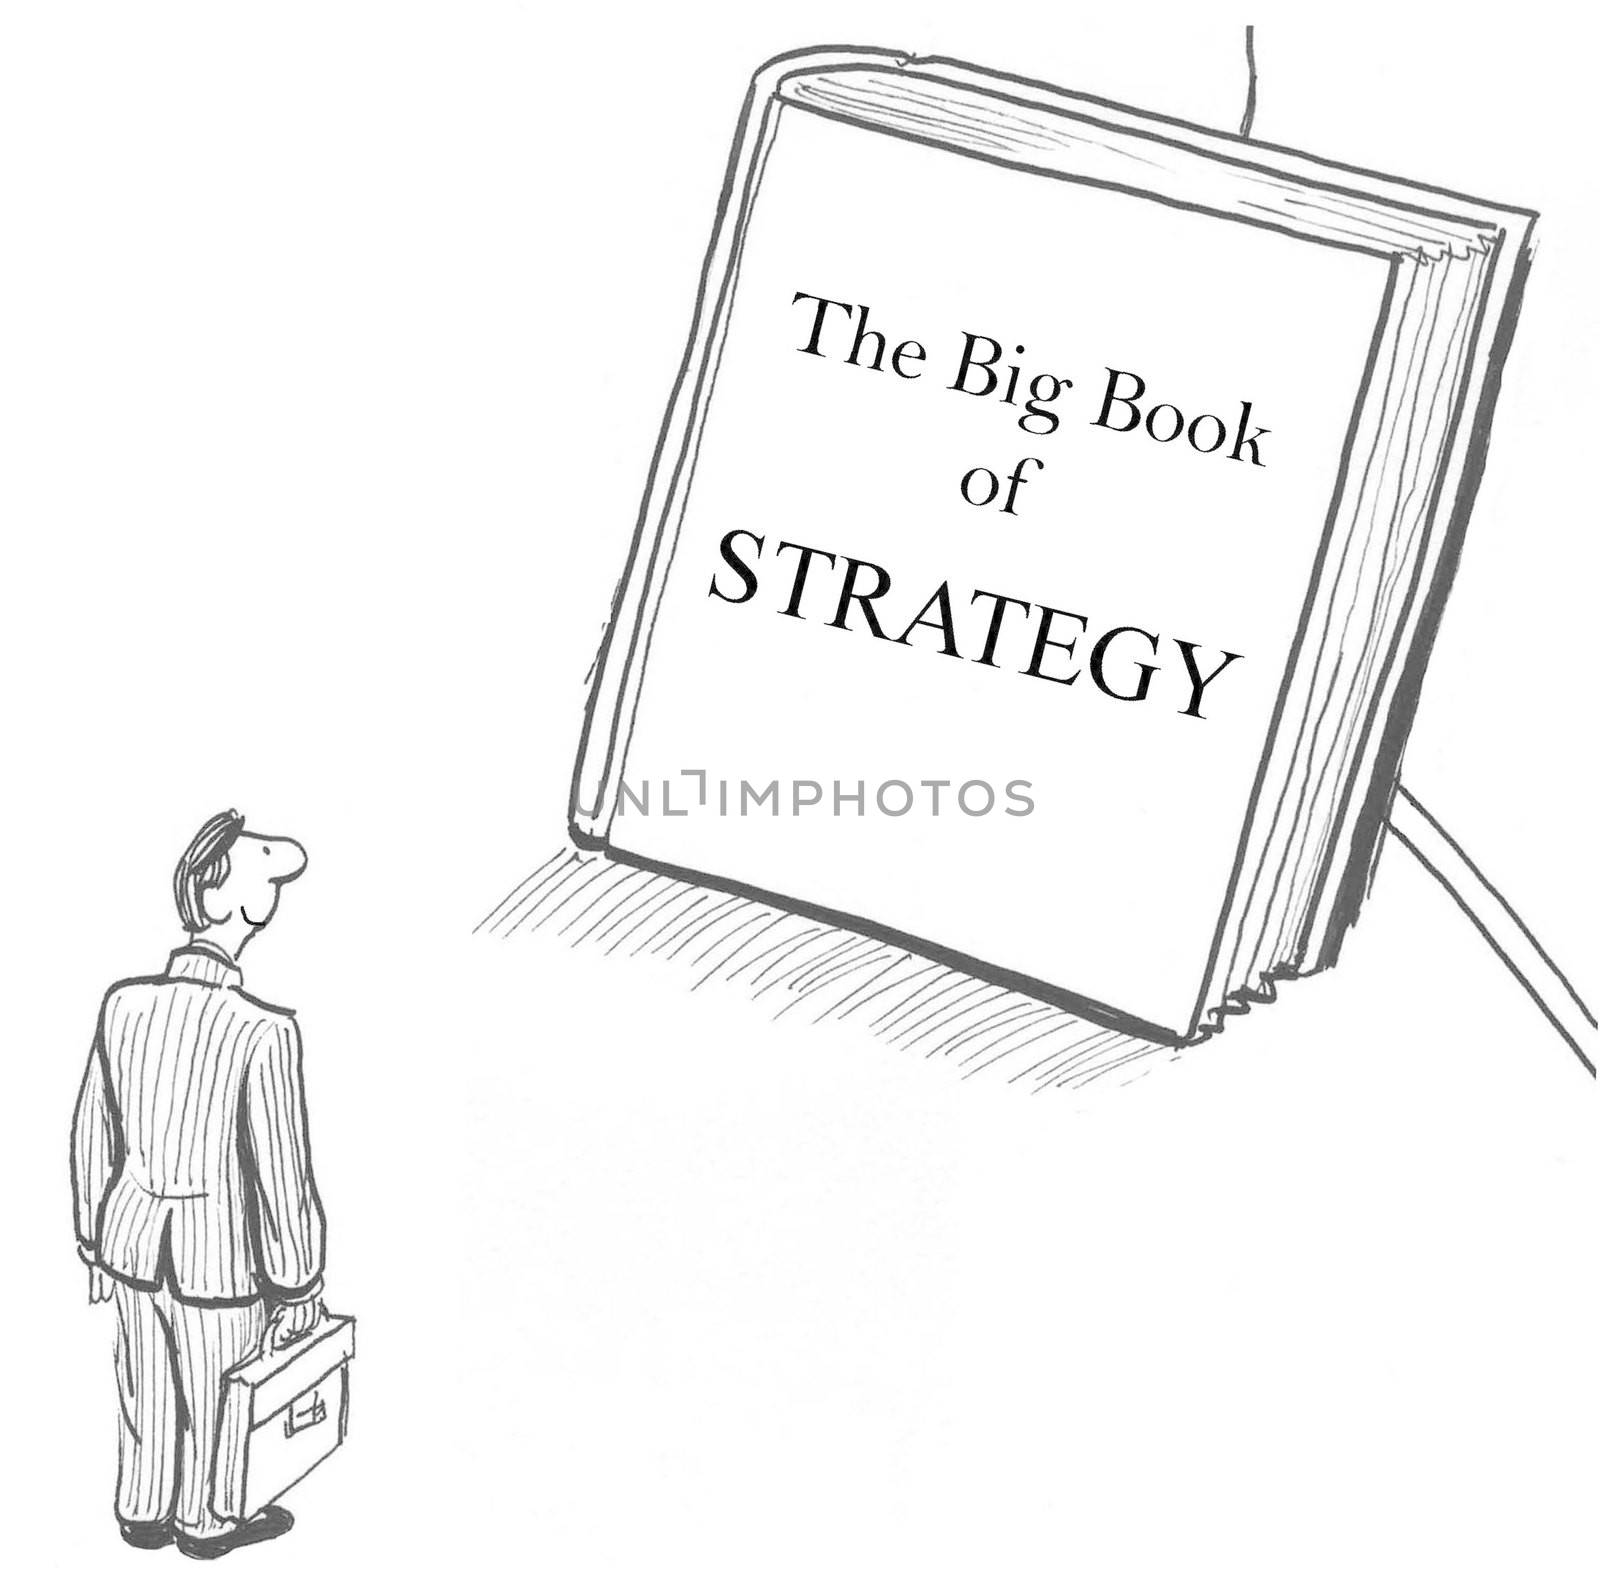 The Big Book of Strategy by andrewgenn